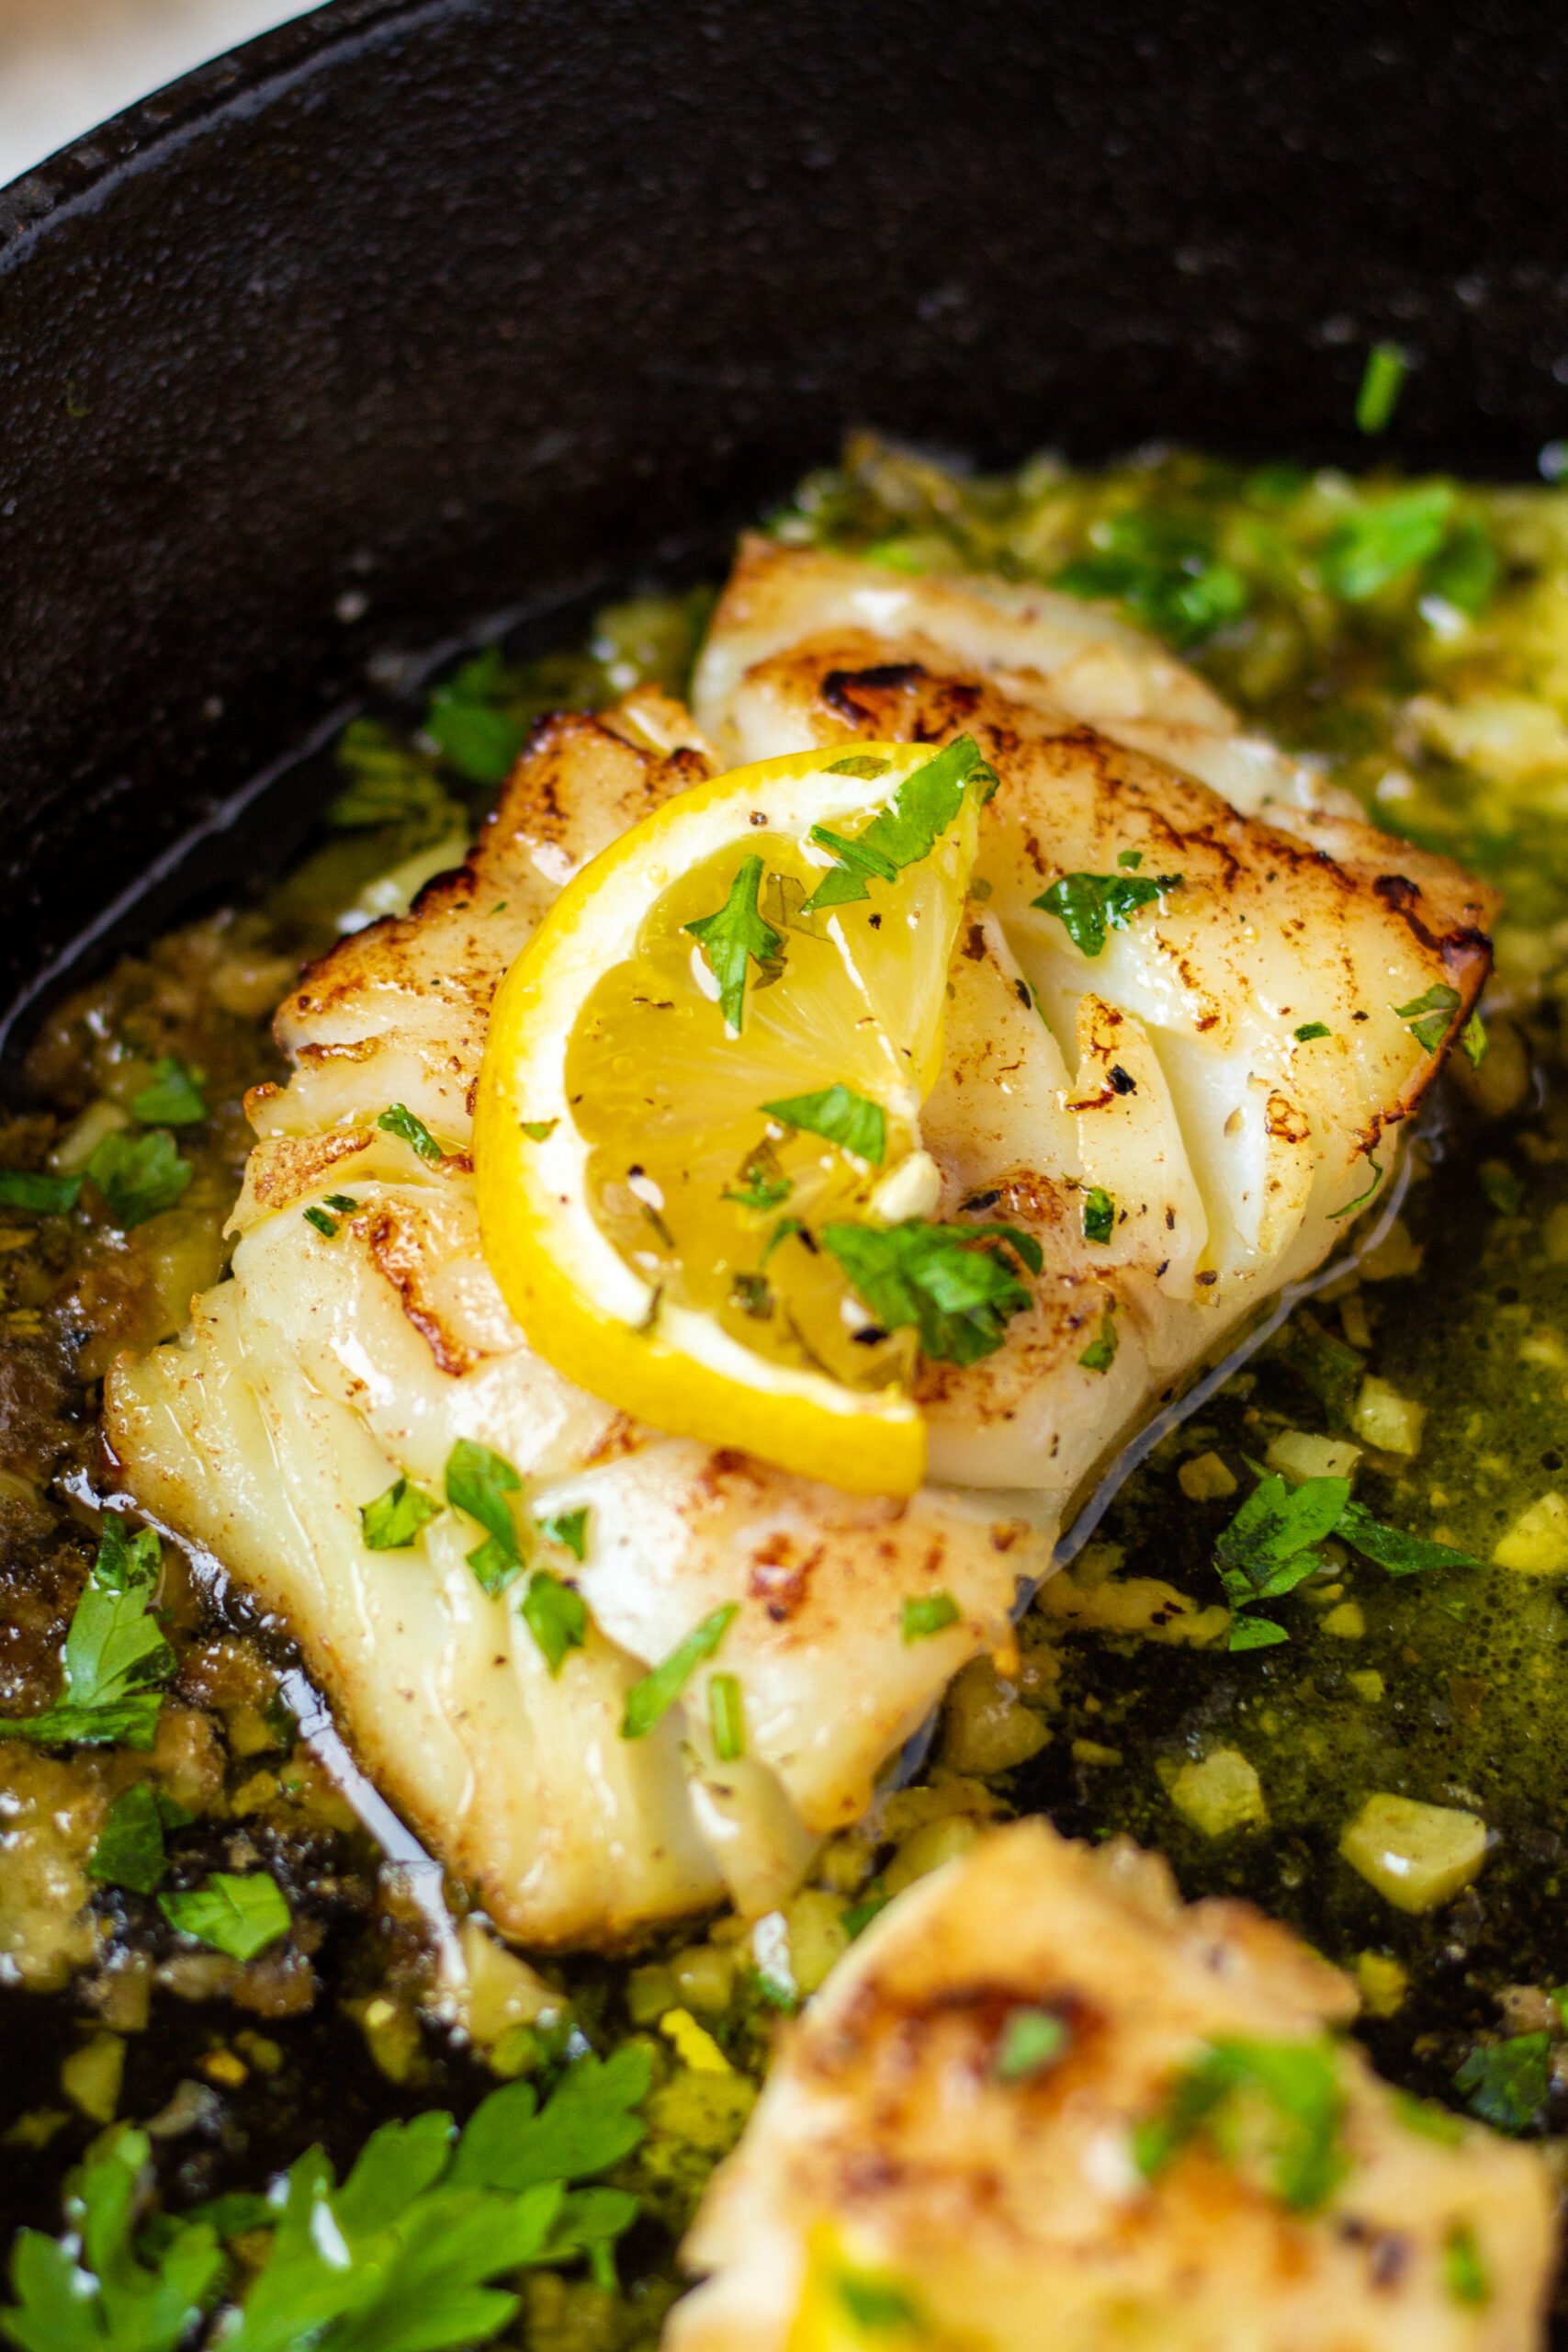 Broiled cod is a quick and easy recipe that's perfect for a family fish dinner. This recipe is gluten free and can be made dairy free easily and with a grand total of 7 ingredients it's a breeze to make. Cod is one of the more common fish fillets you see around and having a solid recipe to prepare it is crucial and at ten minutes of cook time broiling cod is the way to go. #glutenfreerecipes #dairyfreerecipes #glutenfreedairyfreerecipes #healthyfishrecipes #codrecipes #cod #broilerrecipes